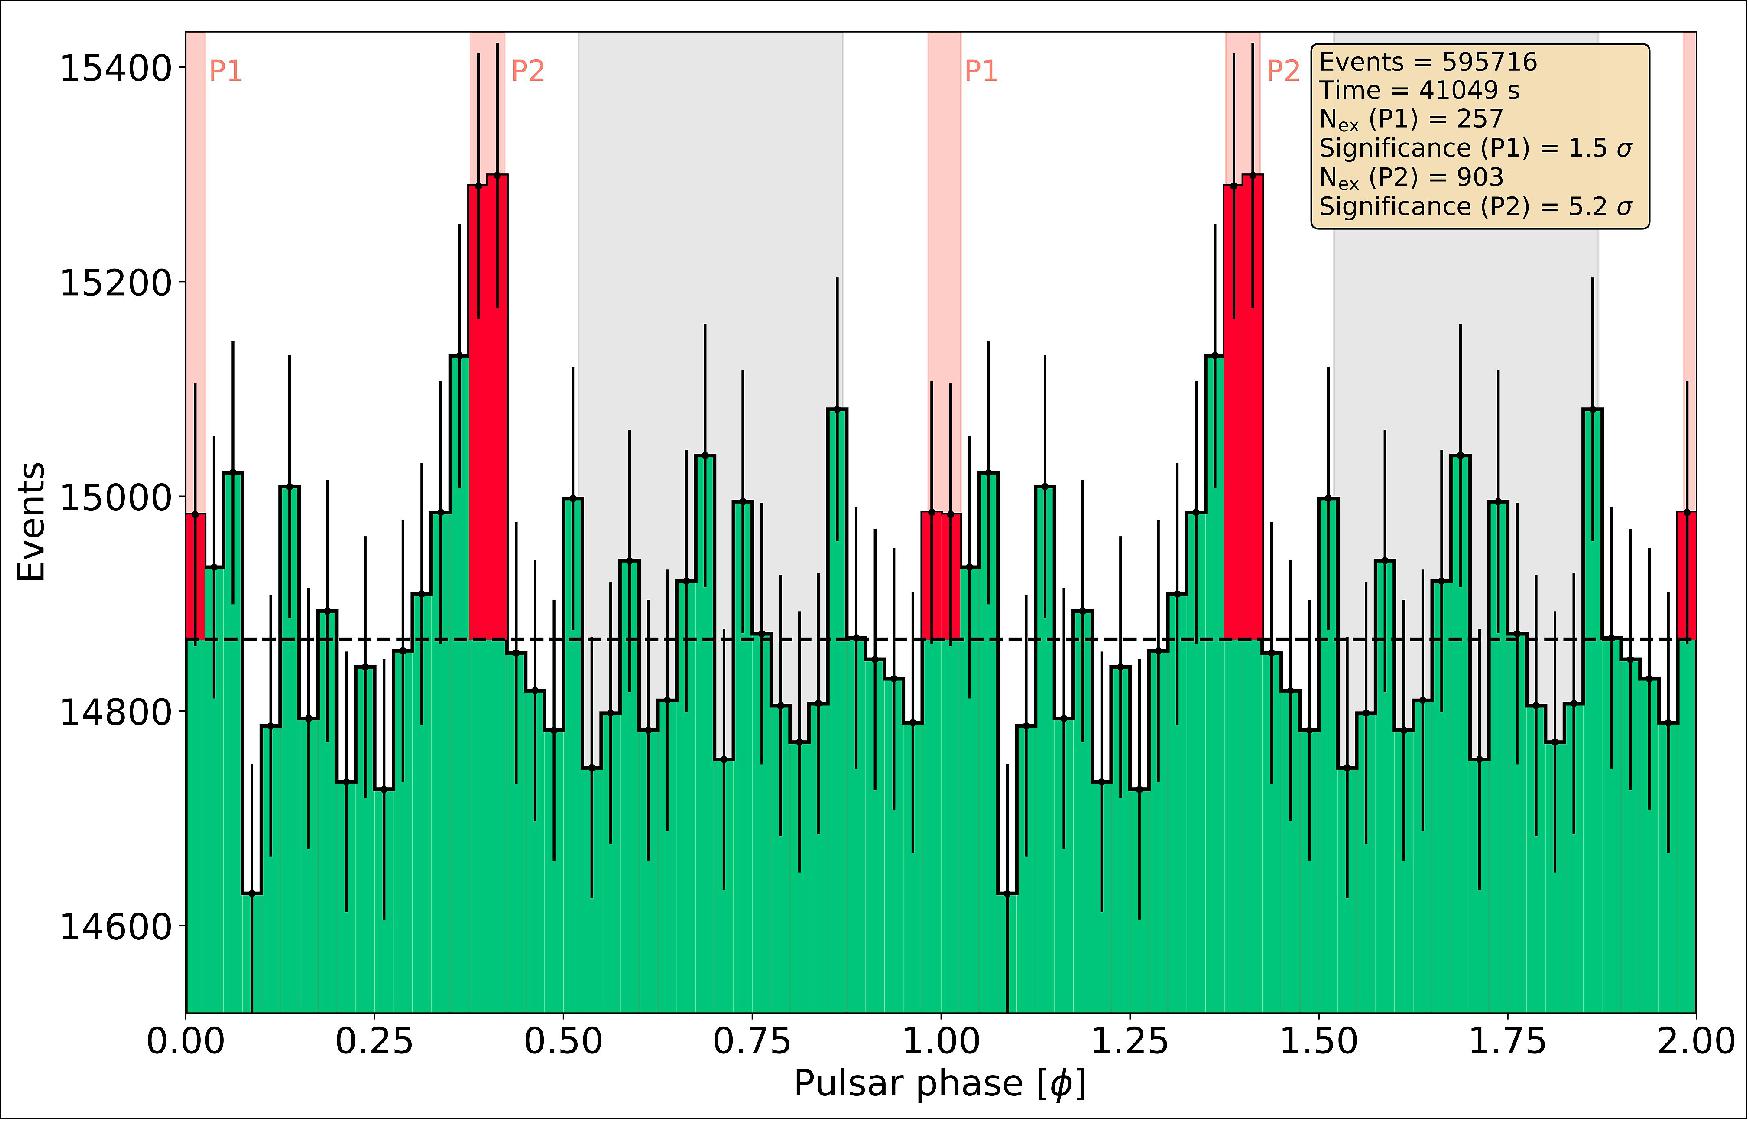 Figure 17: Phasogram of the Crab Pulsar as measured by the LST-1. The pulsar is known to emit pulses of gamma rays during phases P1 and P2. The shown significance is calculated considering source emission from those phases (in red) and background events from phases in grey (image credit: LST Collaboration)